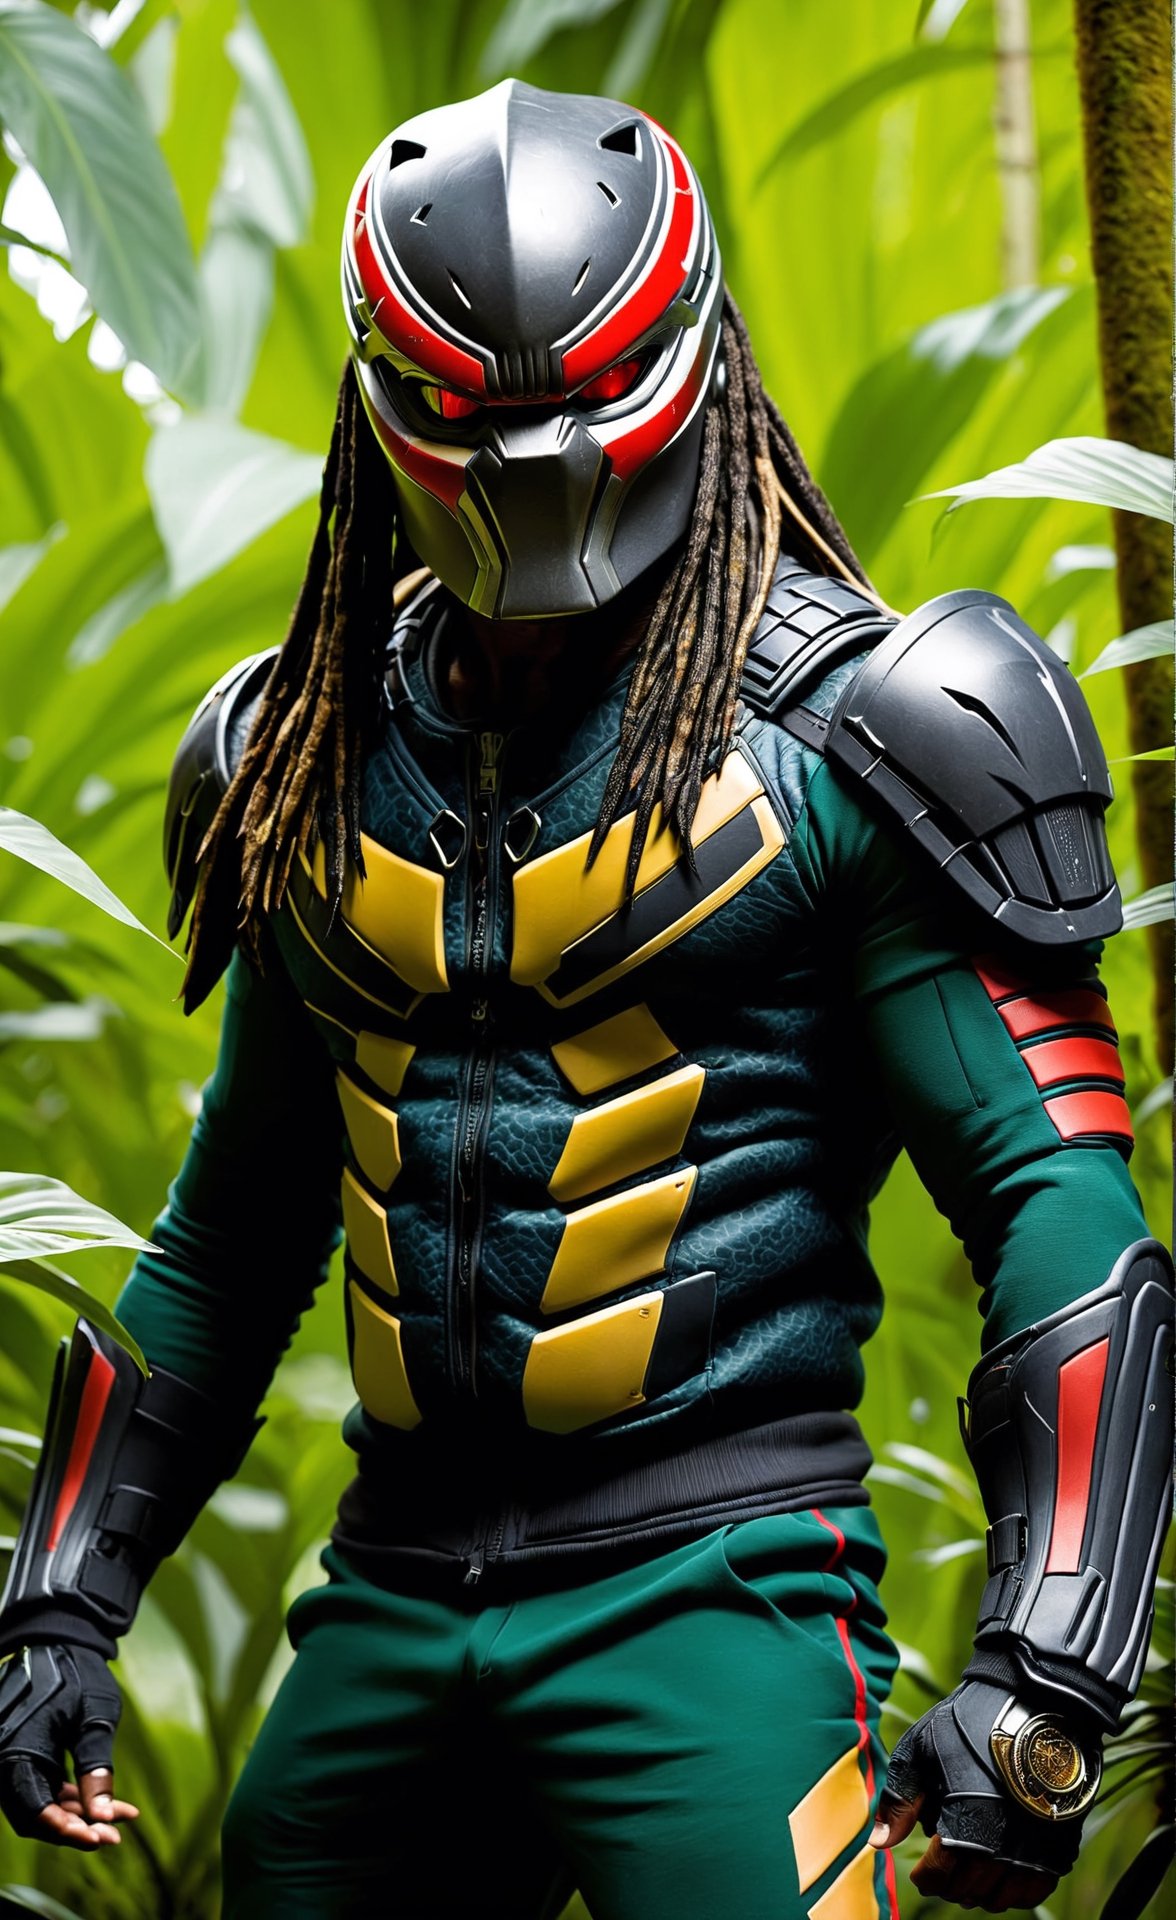 This is no ordinary predator; this is a hunter unlike any other, a fearsome force to be reckoned with even in the most unlikely of attire. In the heart of the jungle, the predator in the tracksuit reigns supreme, a silent and deadly guardian of its domain.